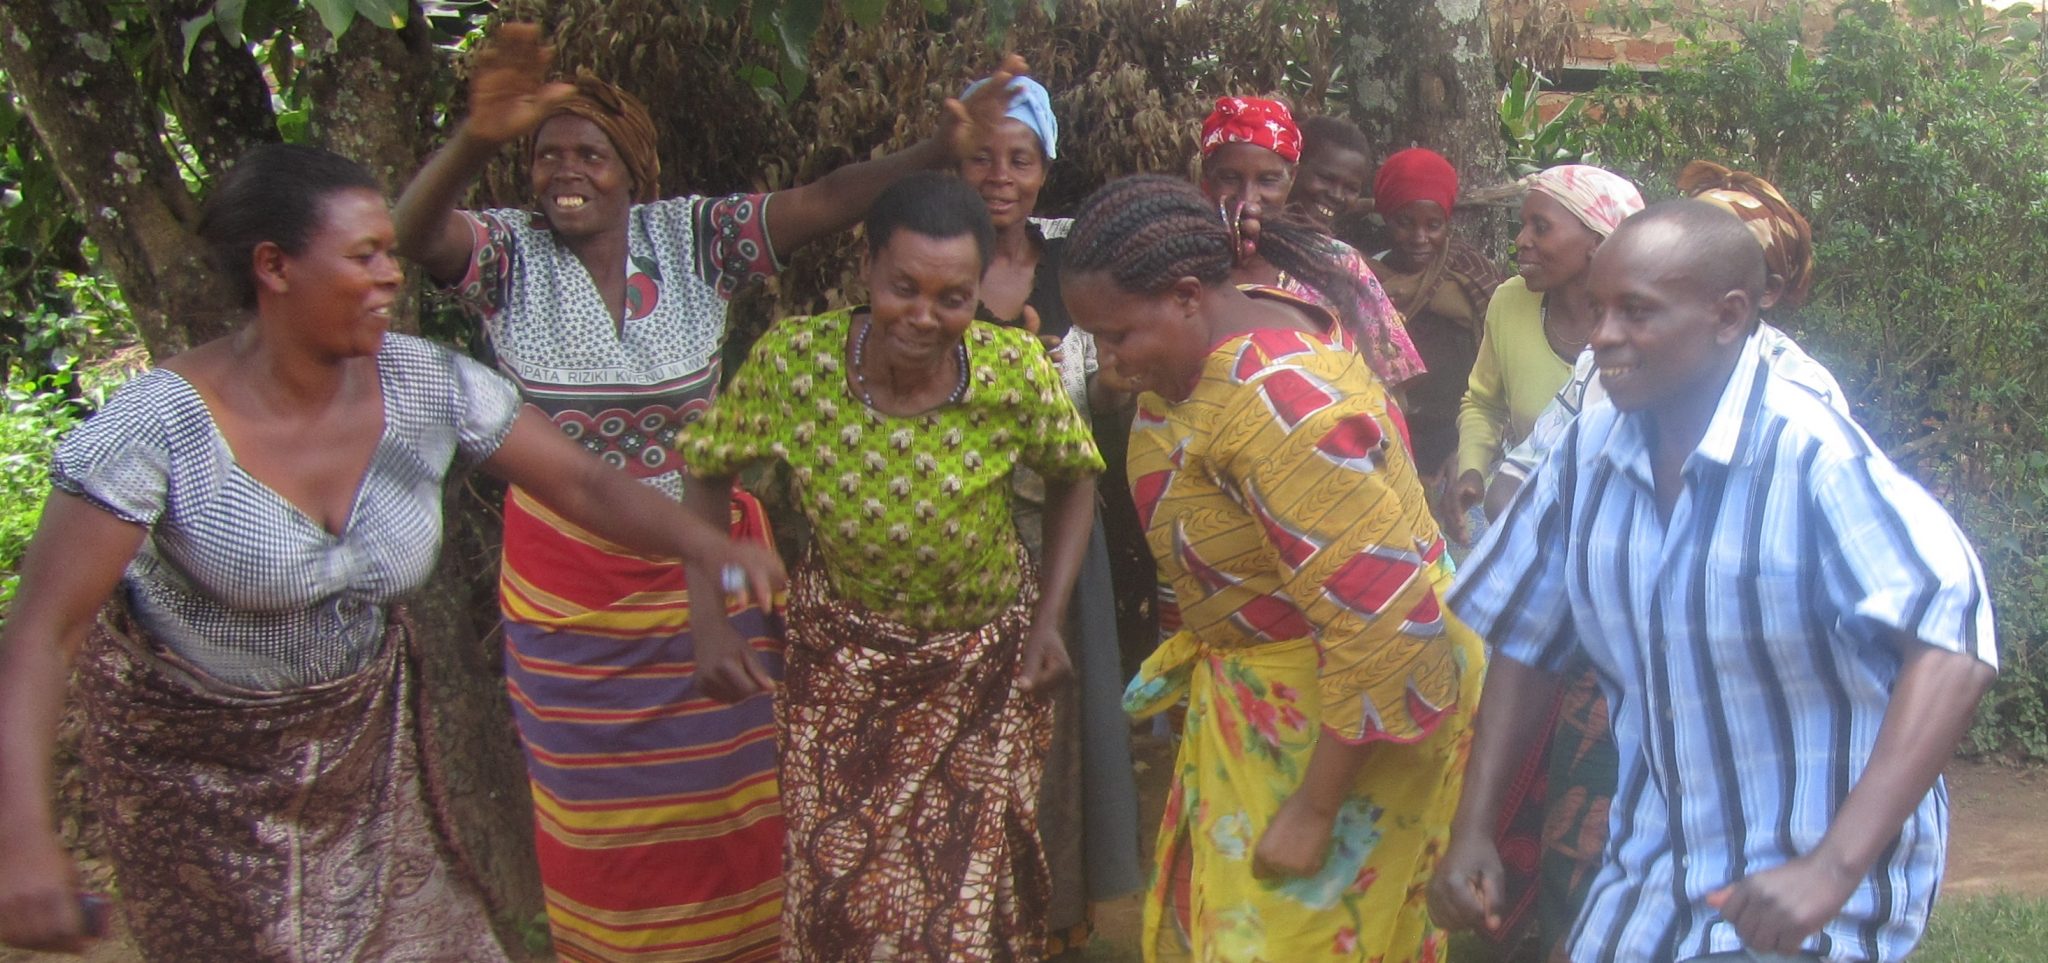 Victory Dance by women after securing a loan